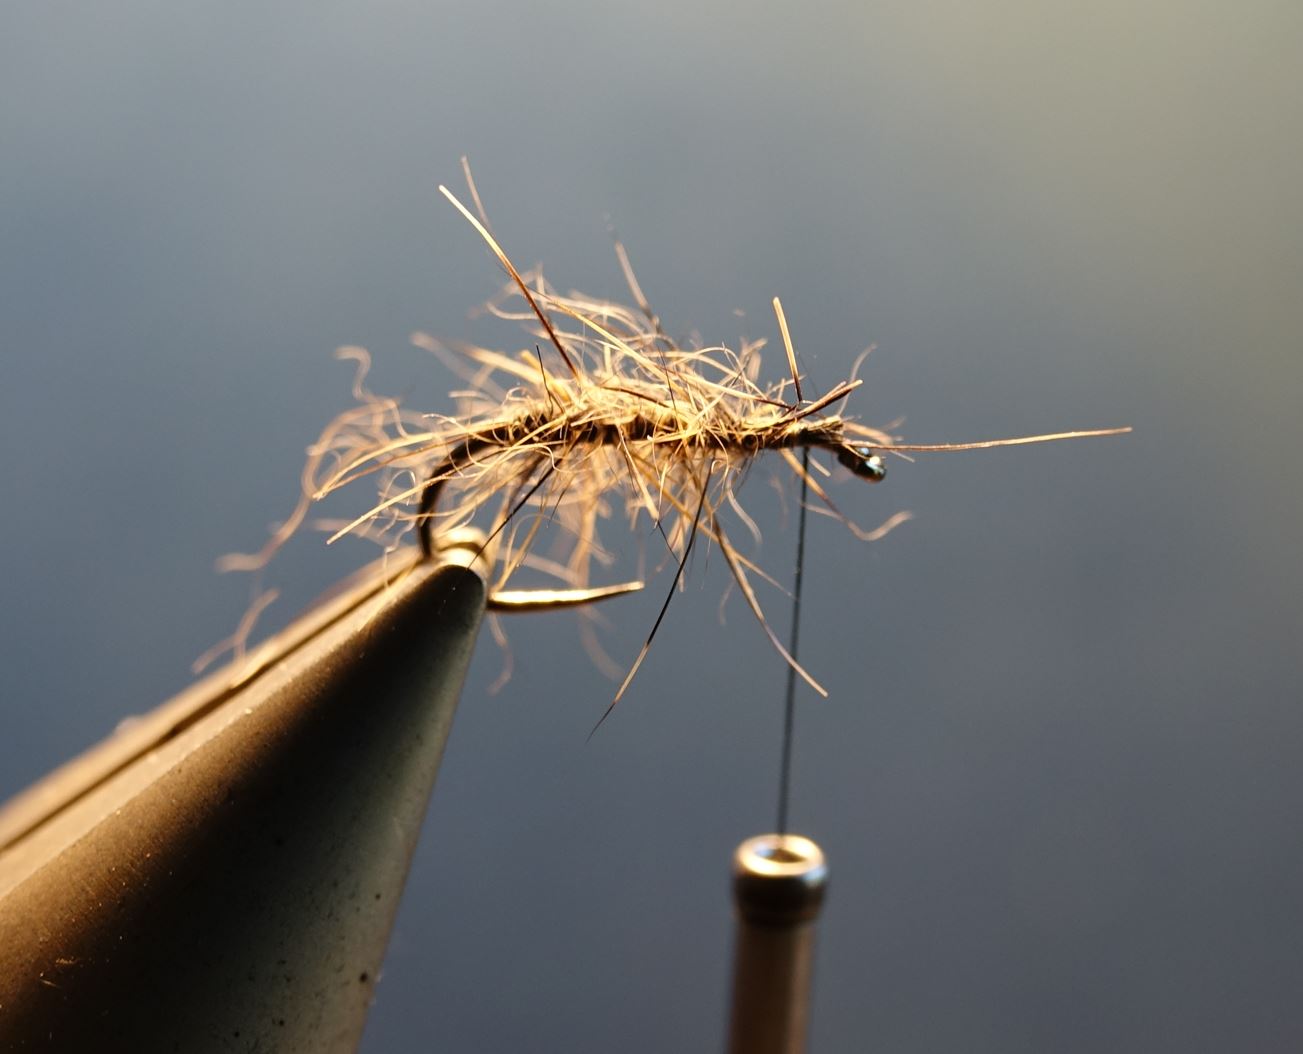 tips tools dubbing loop meche a dubbing flytying eclosion